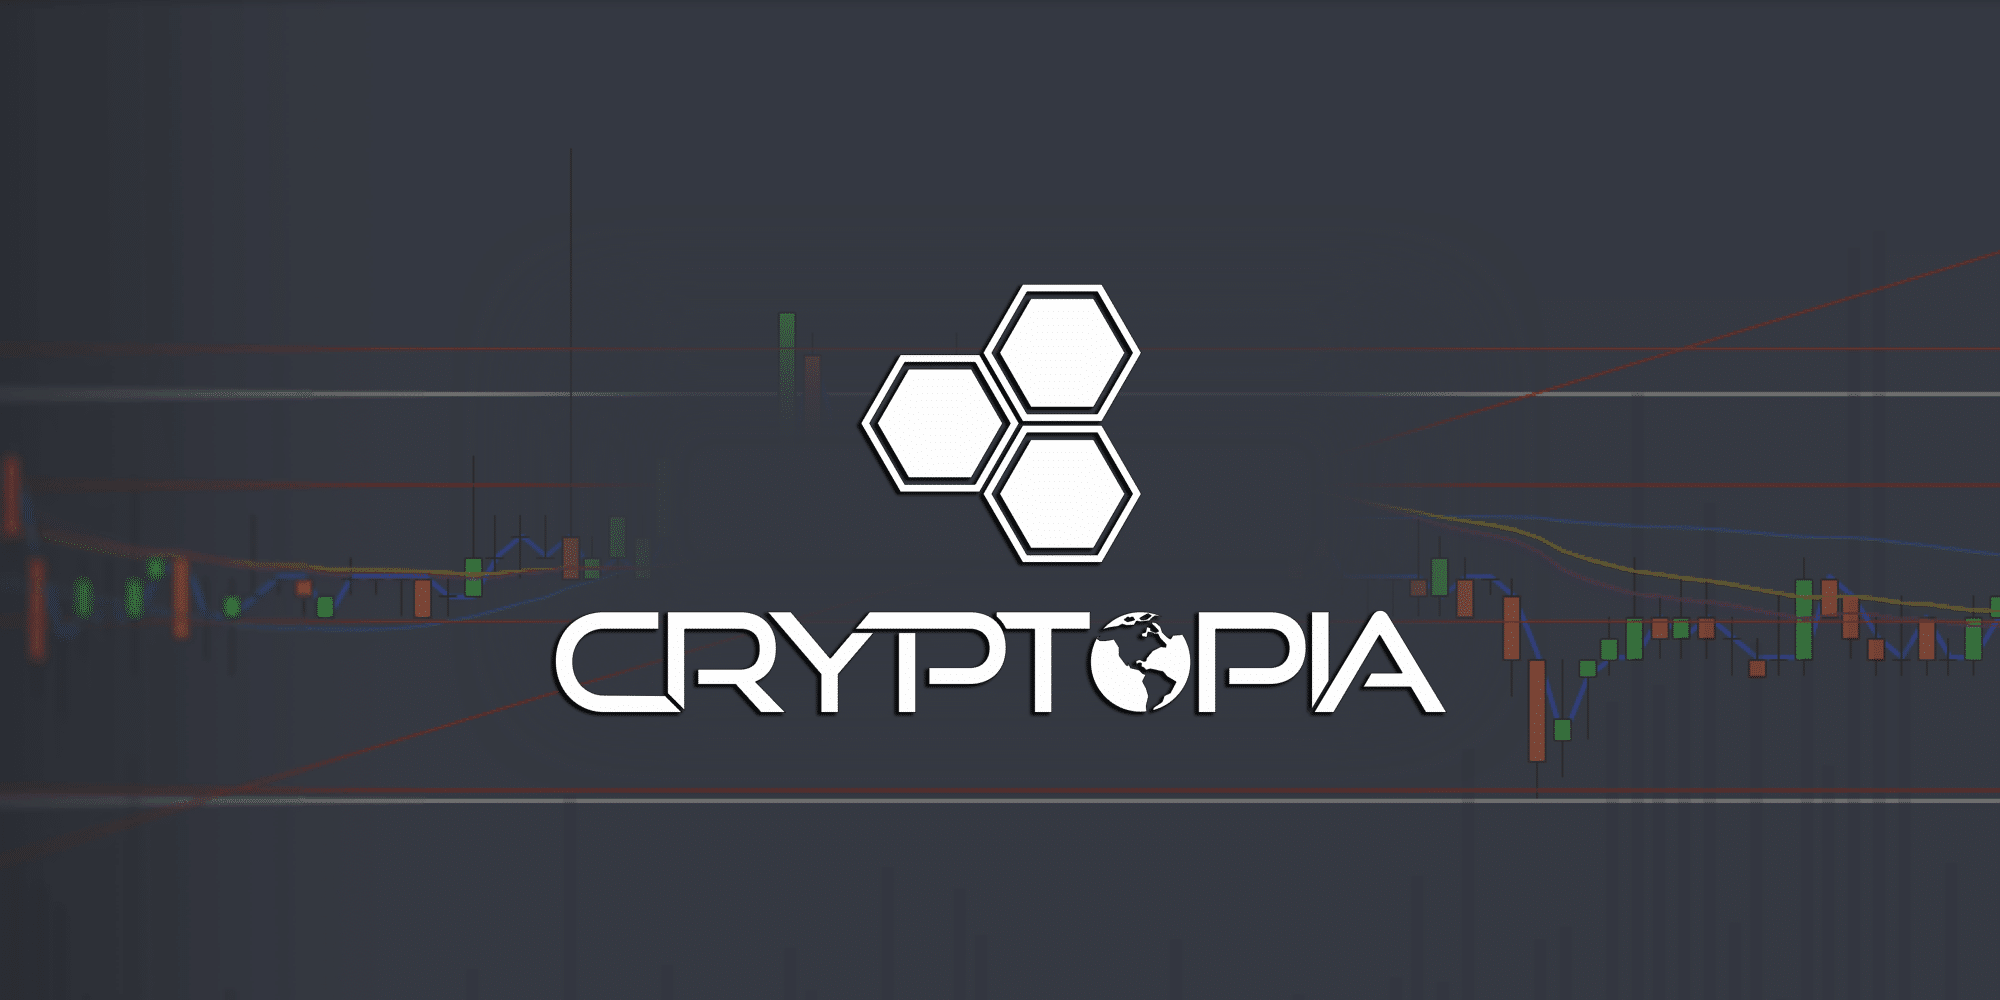 Are You Thinking of Checking Out Cryptopia? Read Our Review First